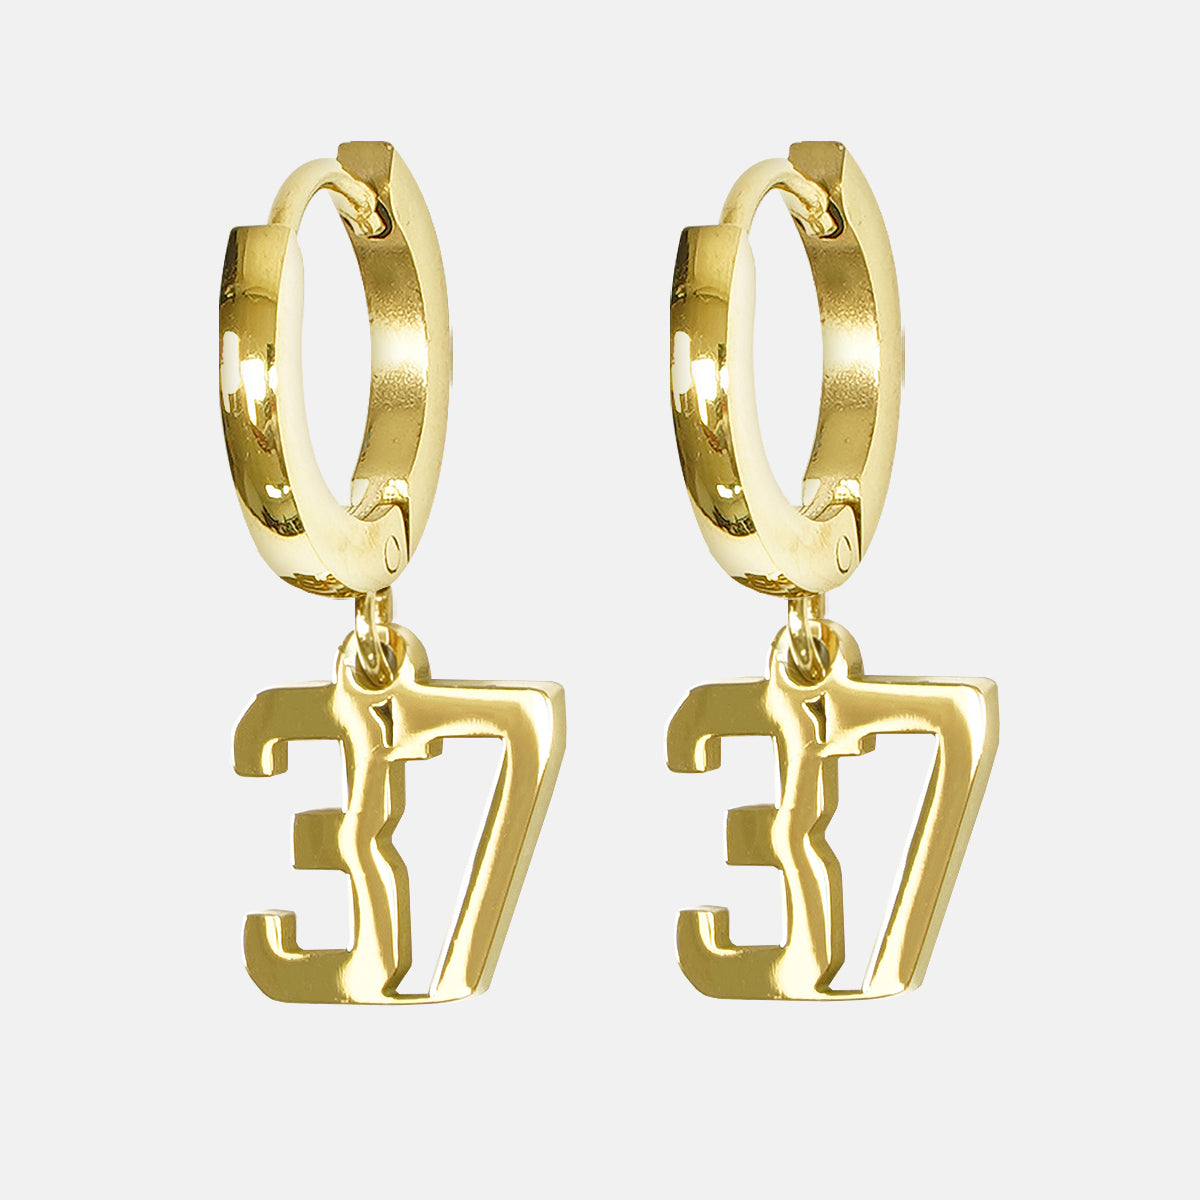 37 Number Earring - Gold Plated Stainless Steel